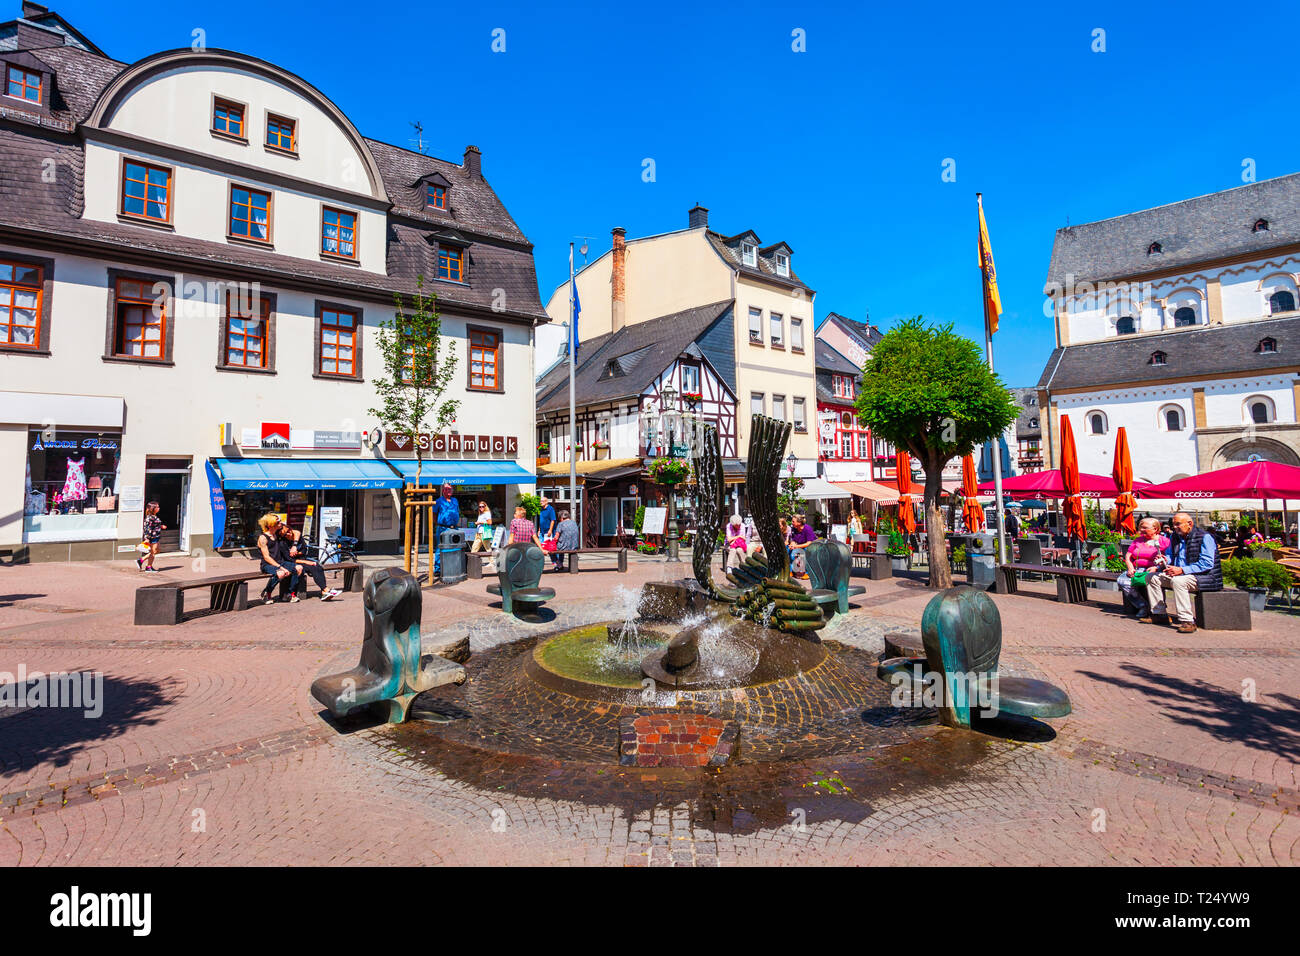 BOPPARD, GERMANY - JUNE 26, 2018: Market square or marktplatz in Boppard.  Boppard is the town lying in the Rhine Gorge, Germany Stock Photo - Alamy